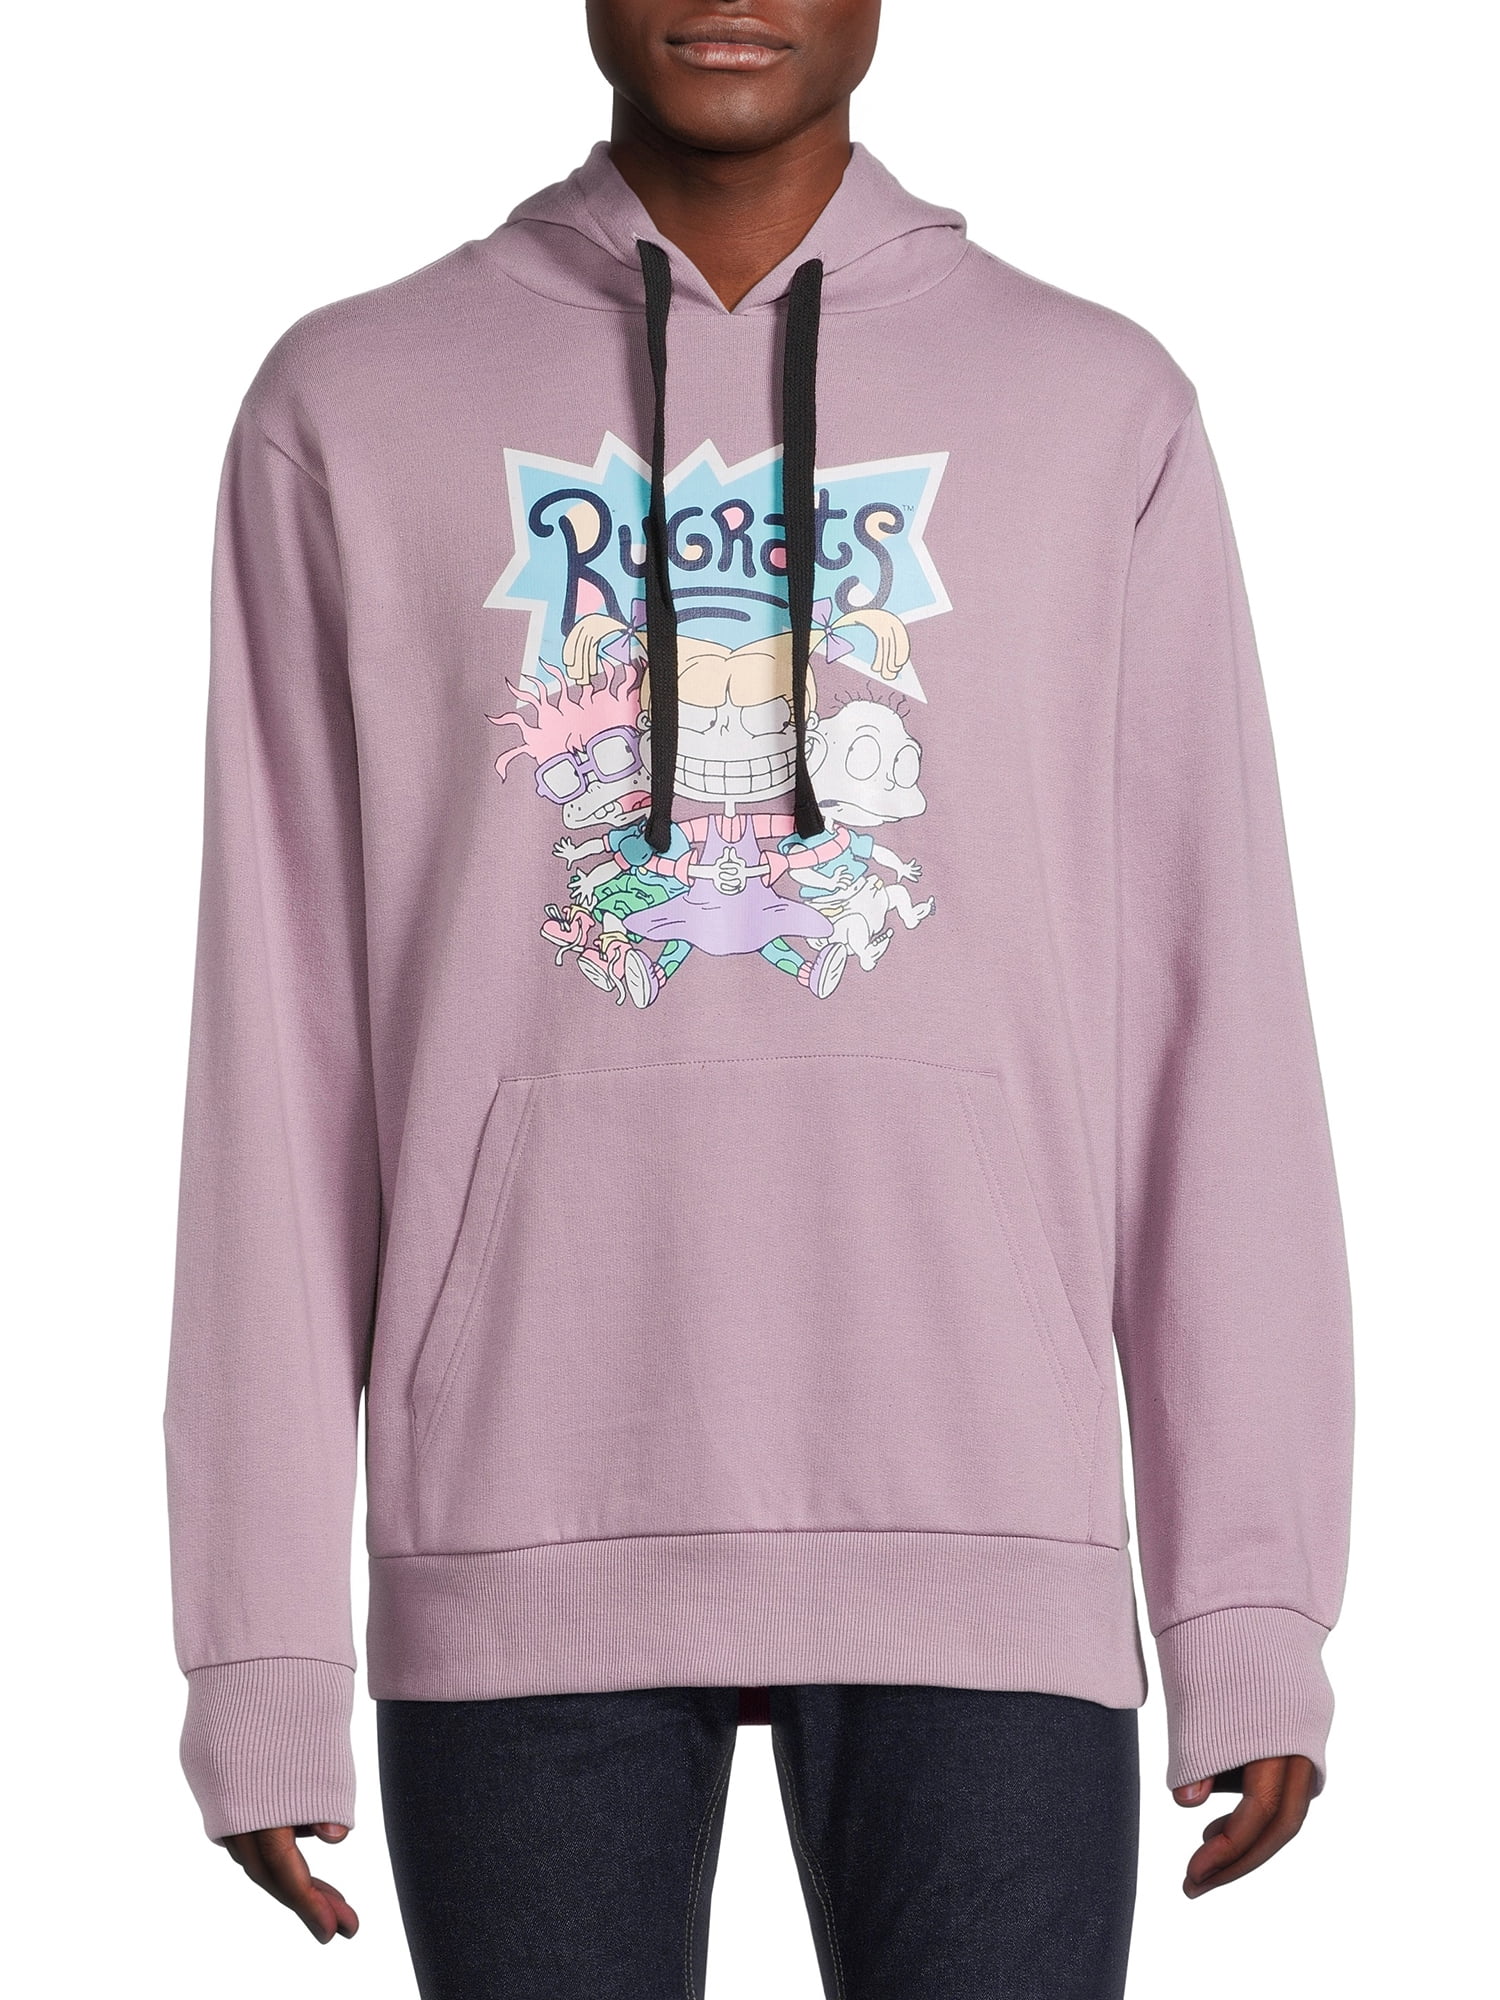 Nickelodeon Rugrats Hoodie with Multiple Graphics Front and Sleeves ...